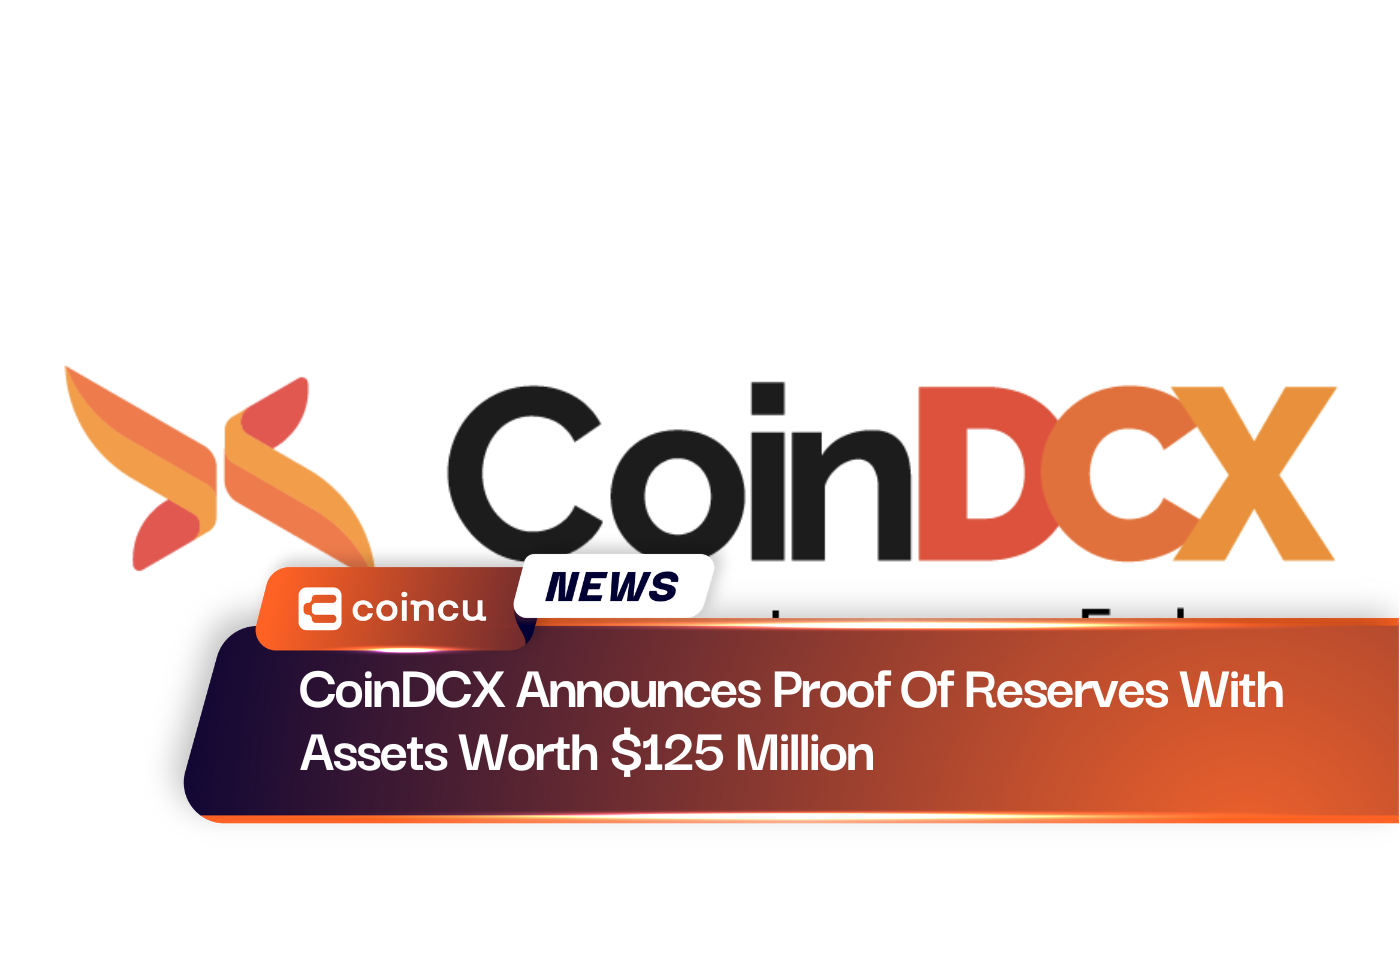 CoinDCX Announces Proof Of Reserves With Assets Worth $125 Million